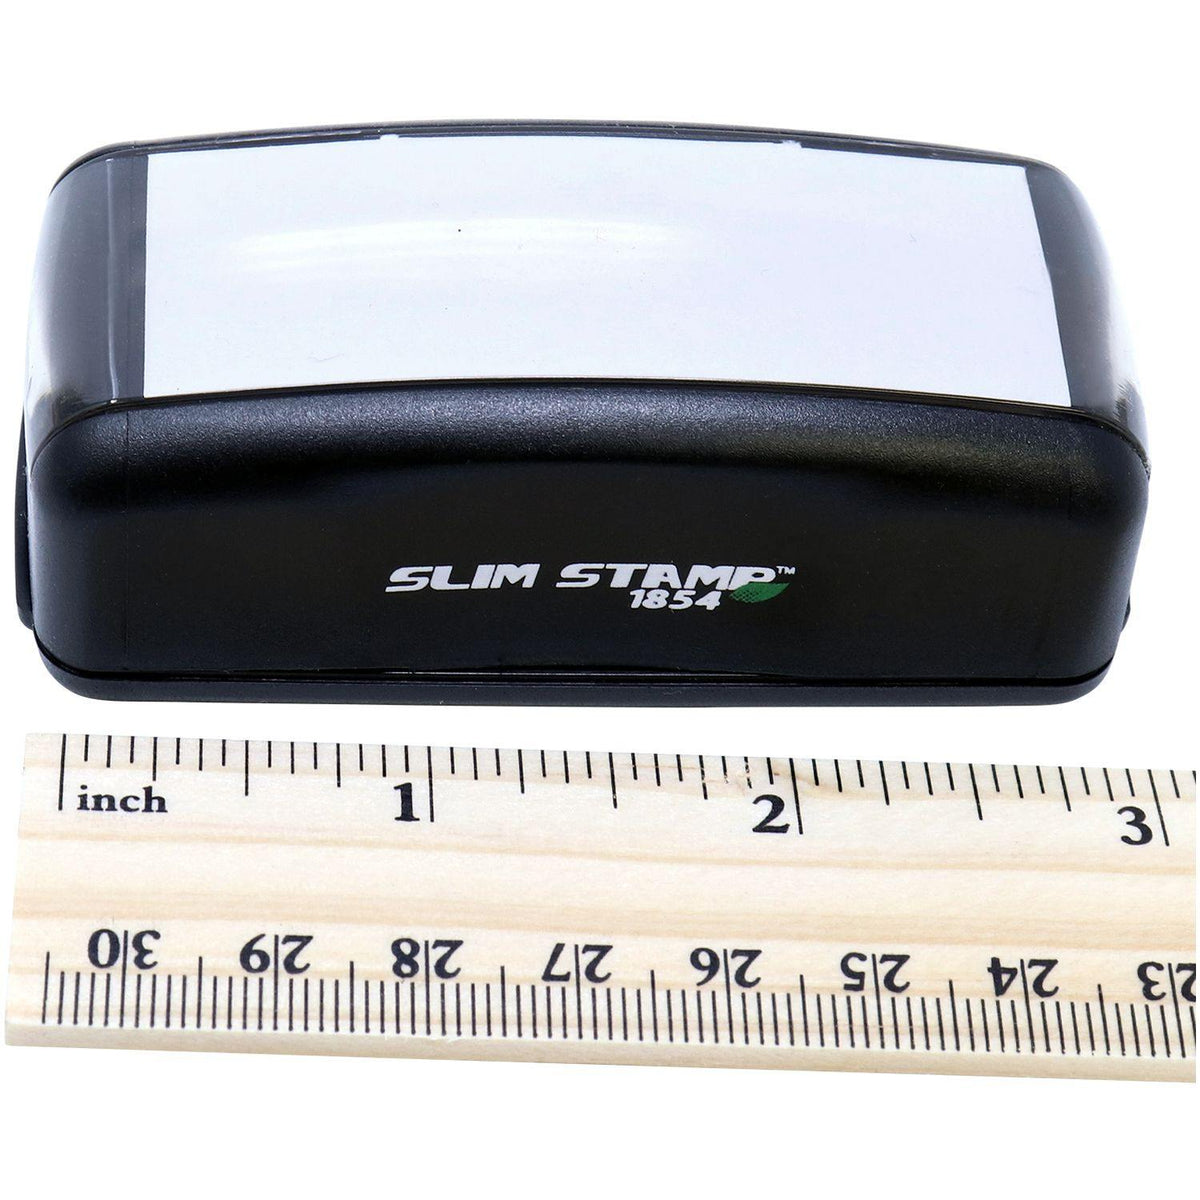 Measurement Large Pre Inked Priority Stamp with Ruler